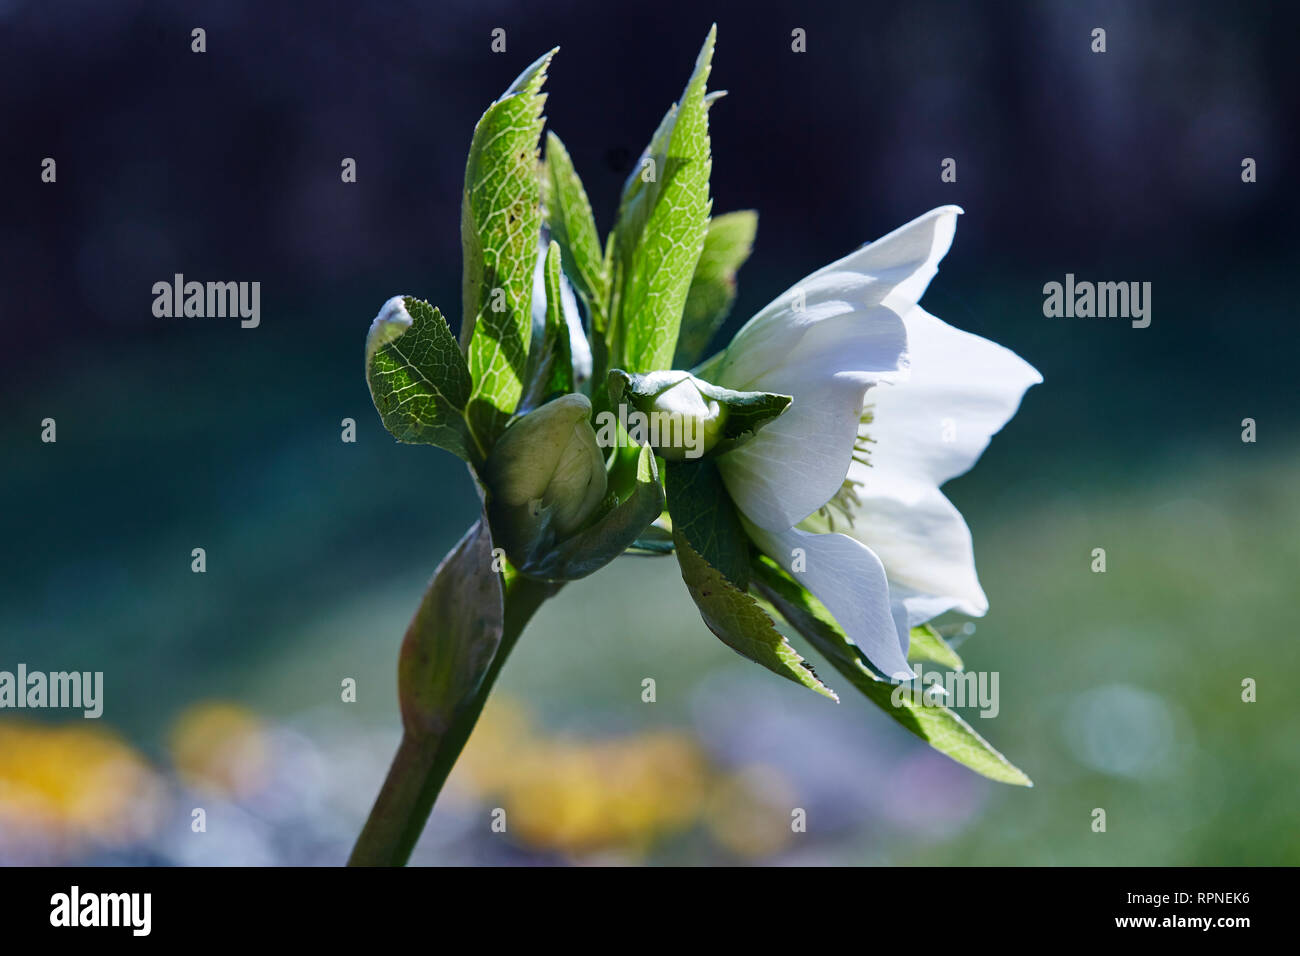 A  single stem of a white Helleborus niger showing flower and buds Stock Photo